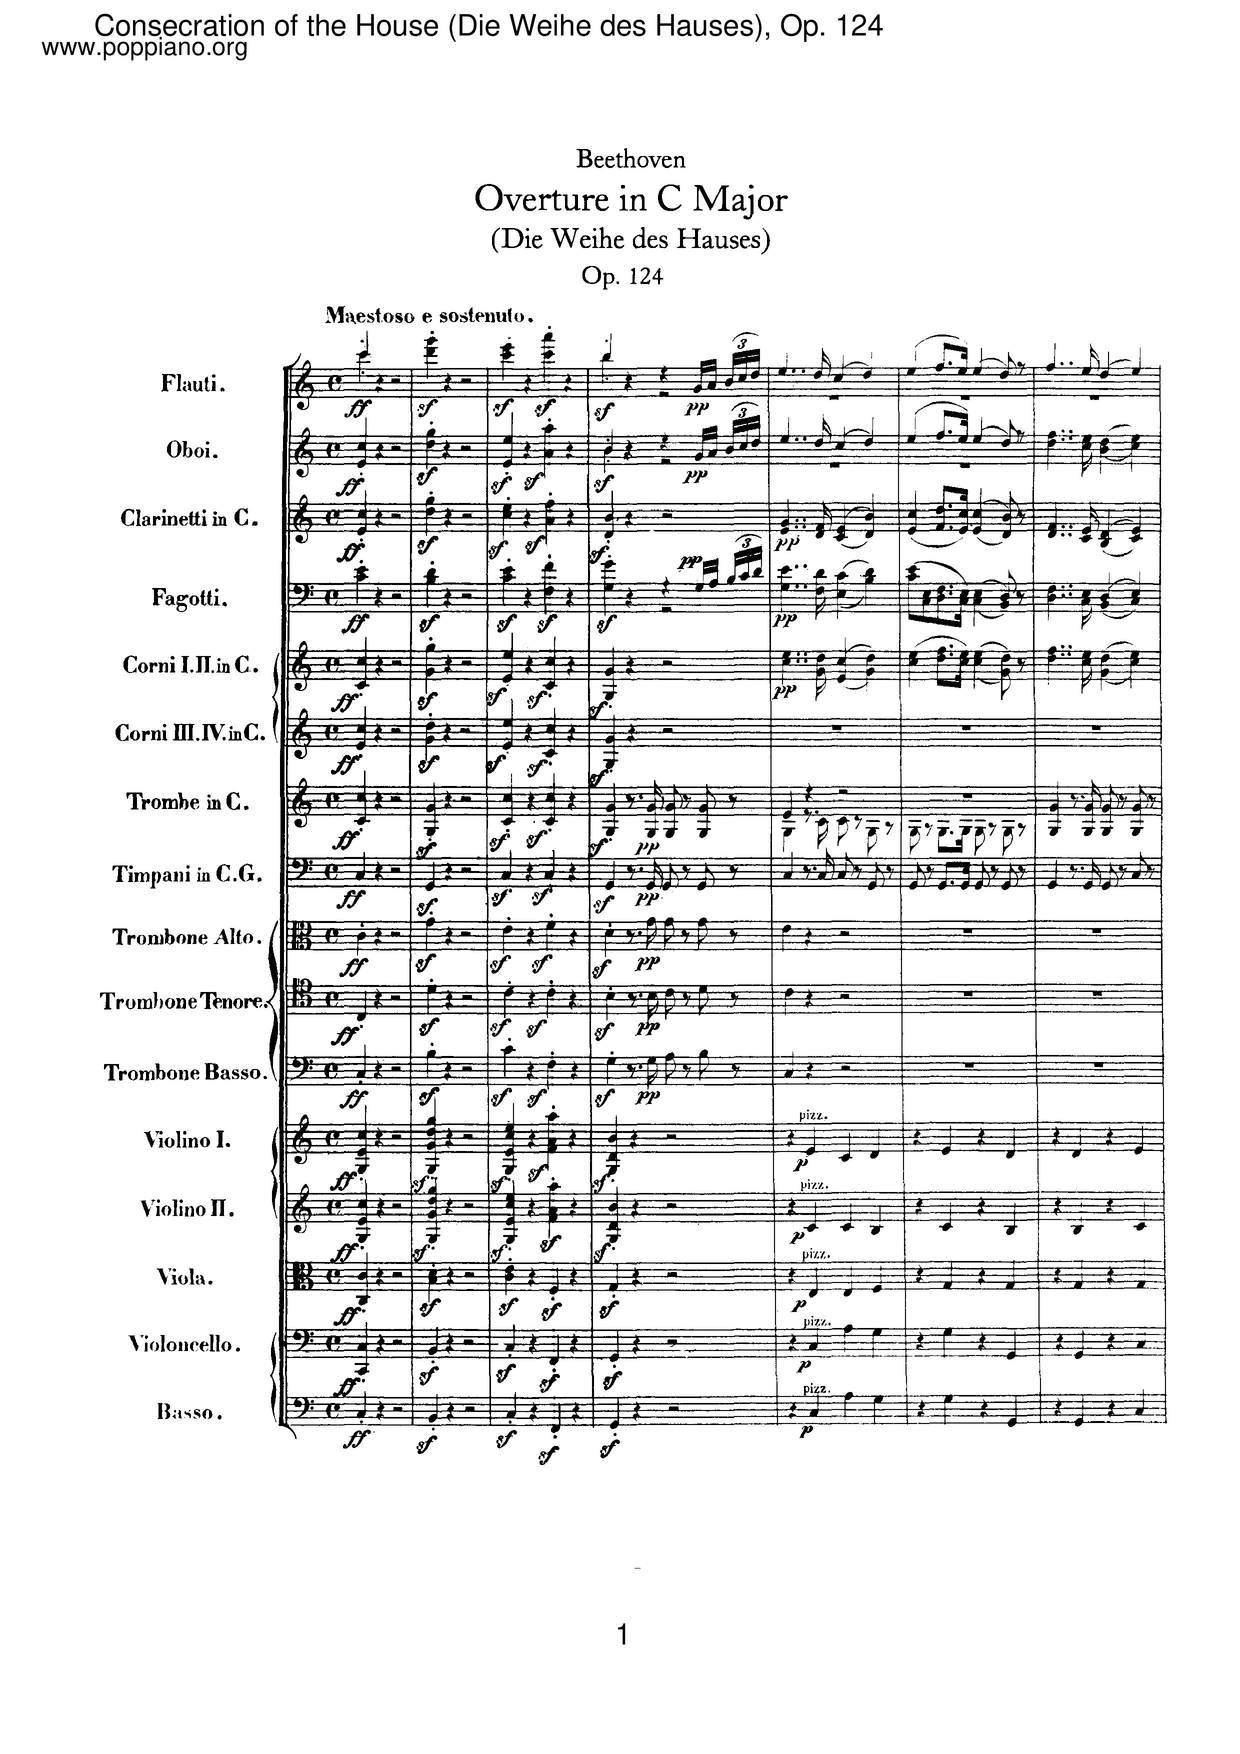 The Consecration Of The House, Op. 124 Score